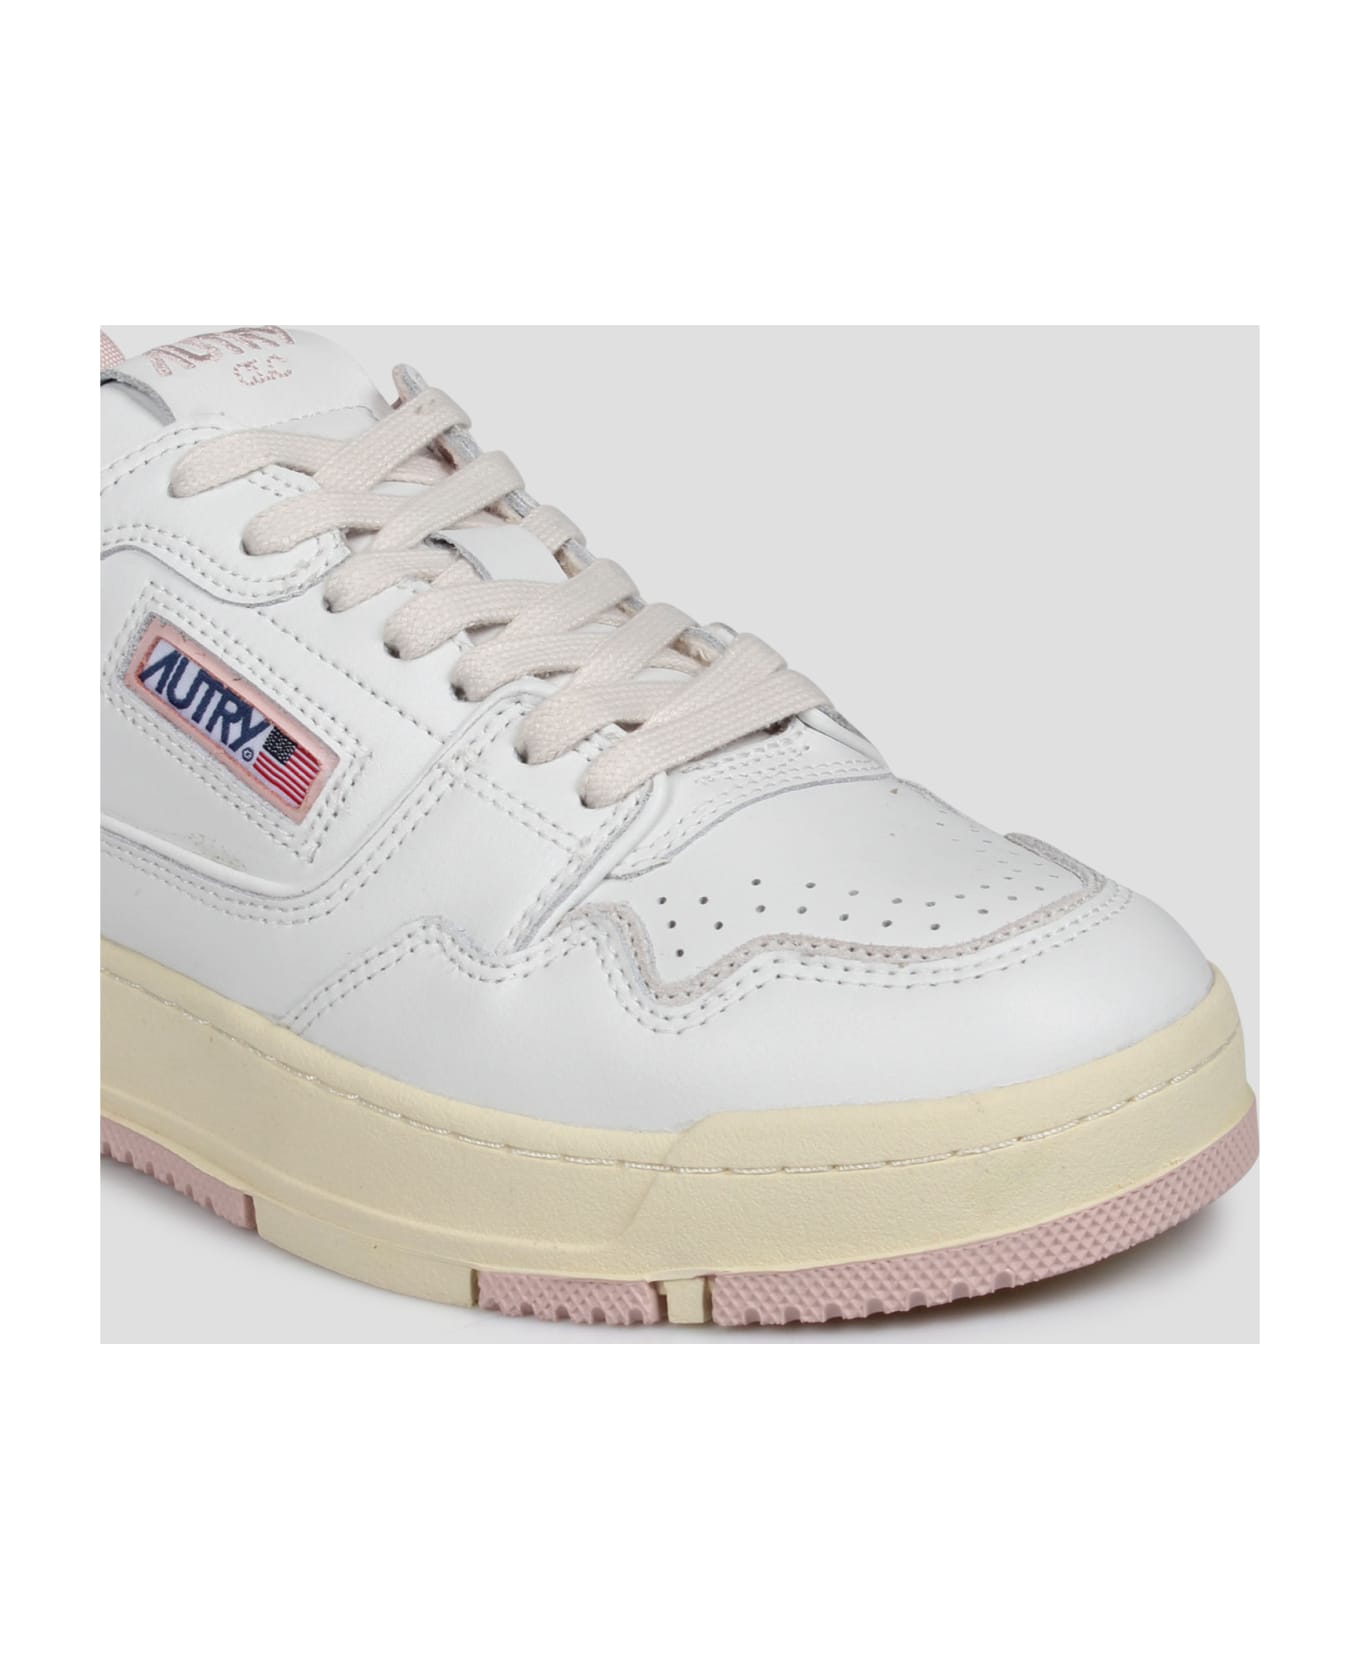 Autry Clc Sneakers - White スニーカー